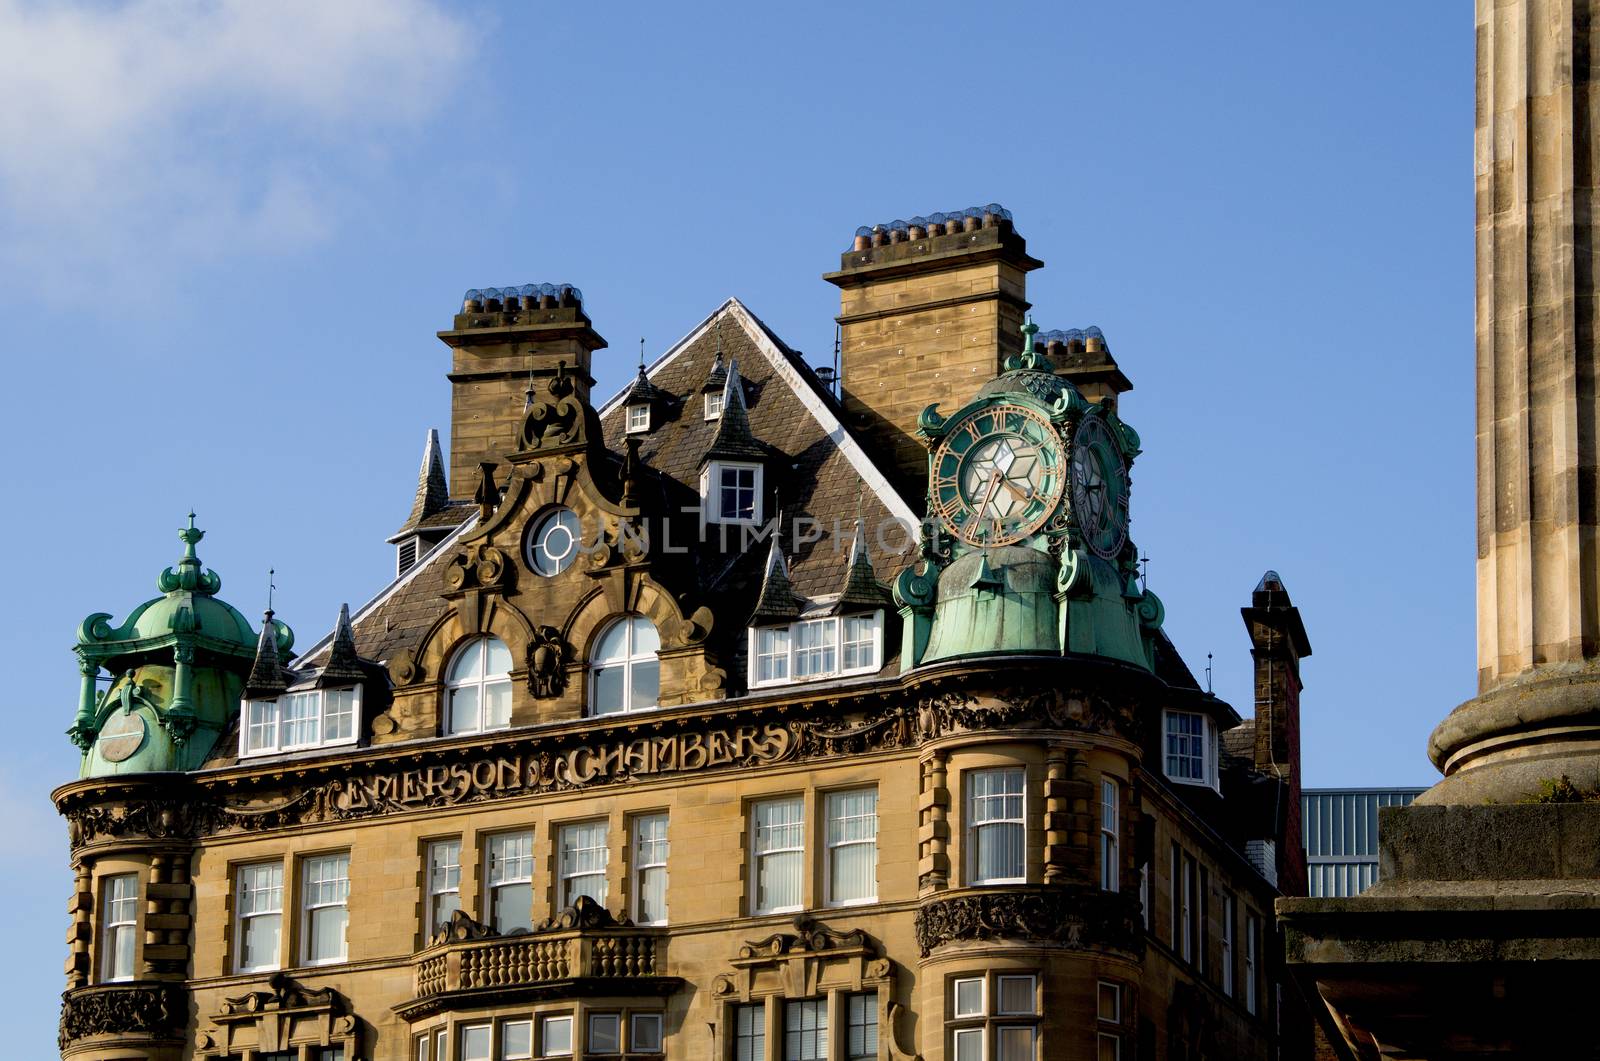 Ornate roof of an imposing Newcastle city centre building